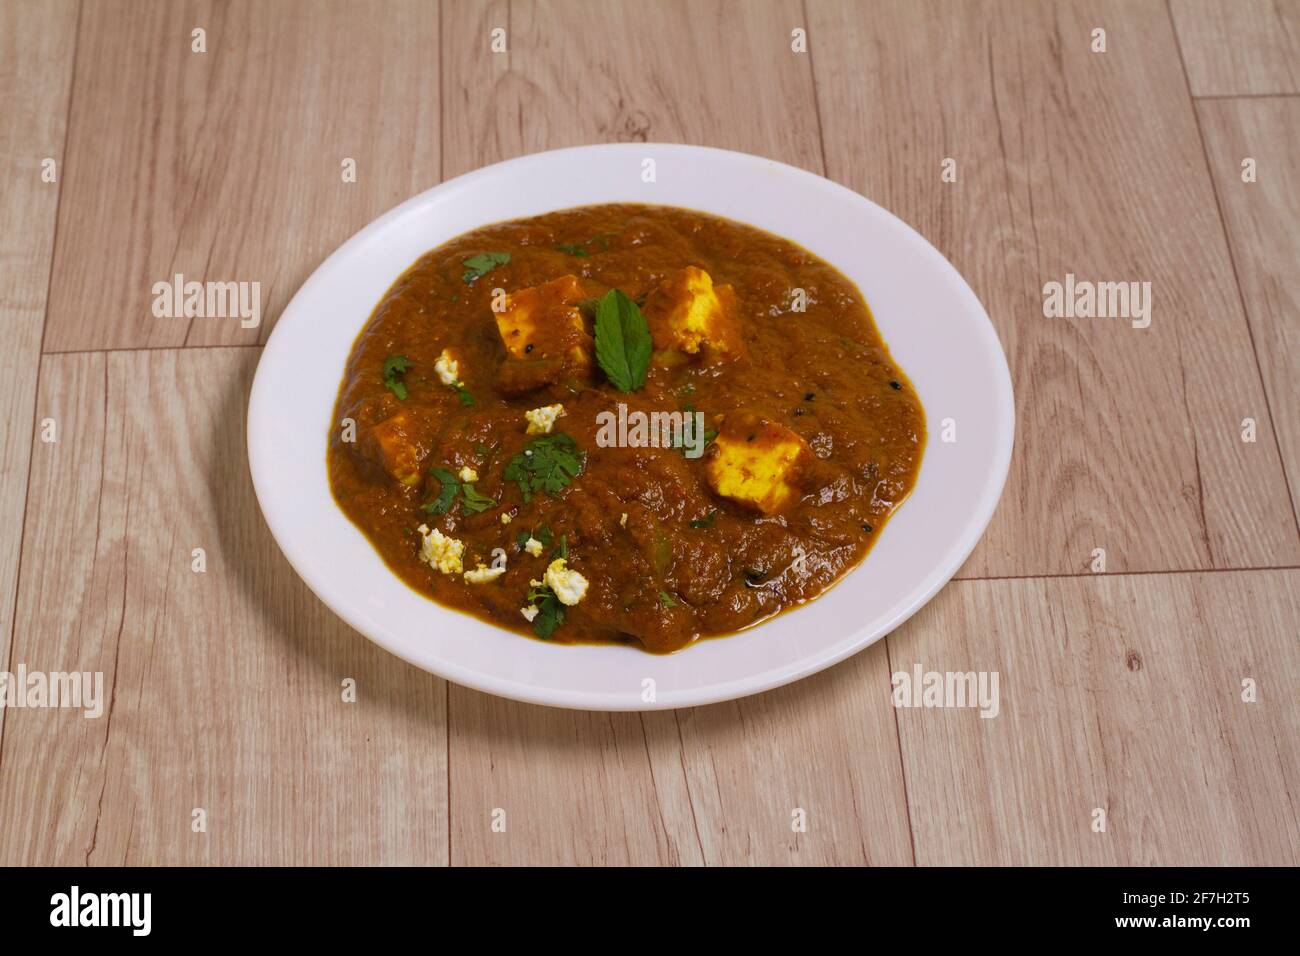 Amritsari Paneer, is a famous indian dish, served over a rustic wooden background, selective focus Stock Photo